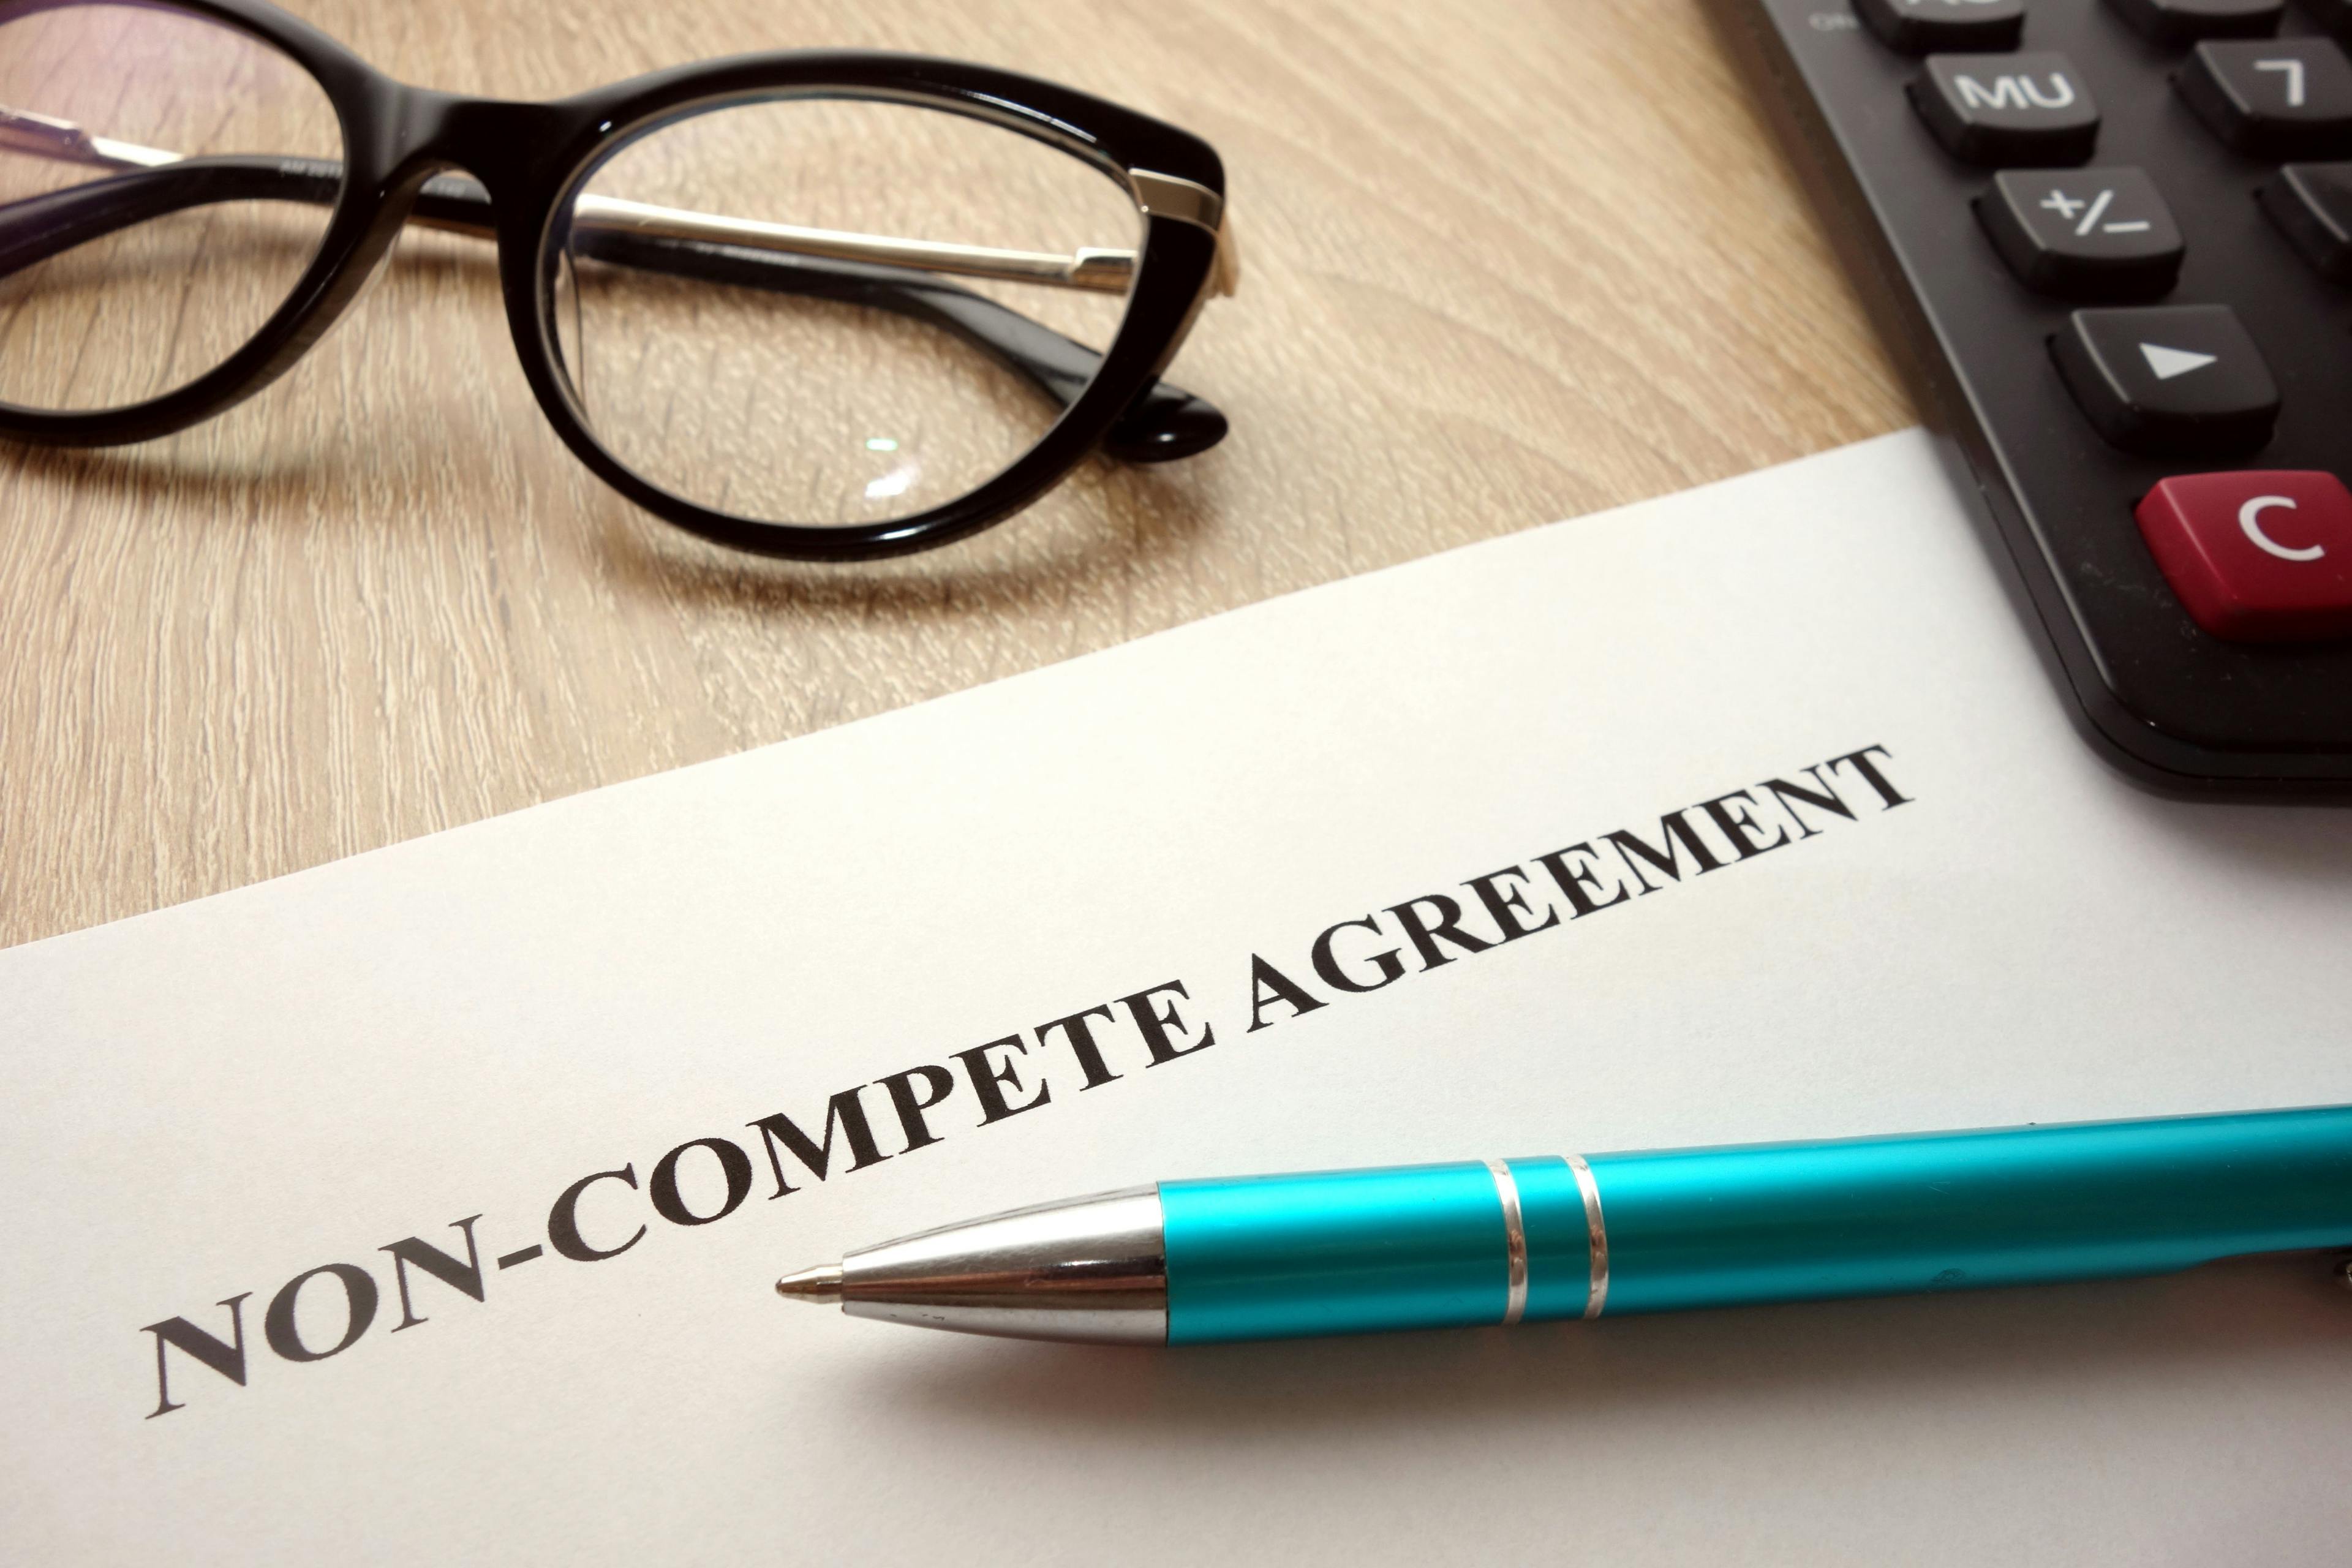 Healthcare Split on Noncompete Agreements